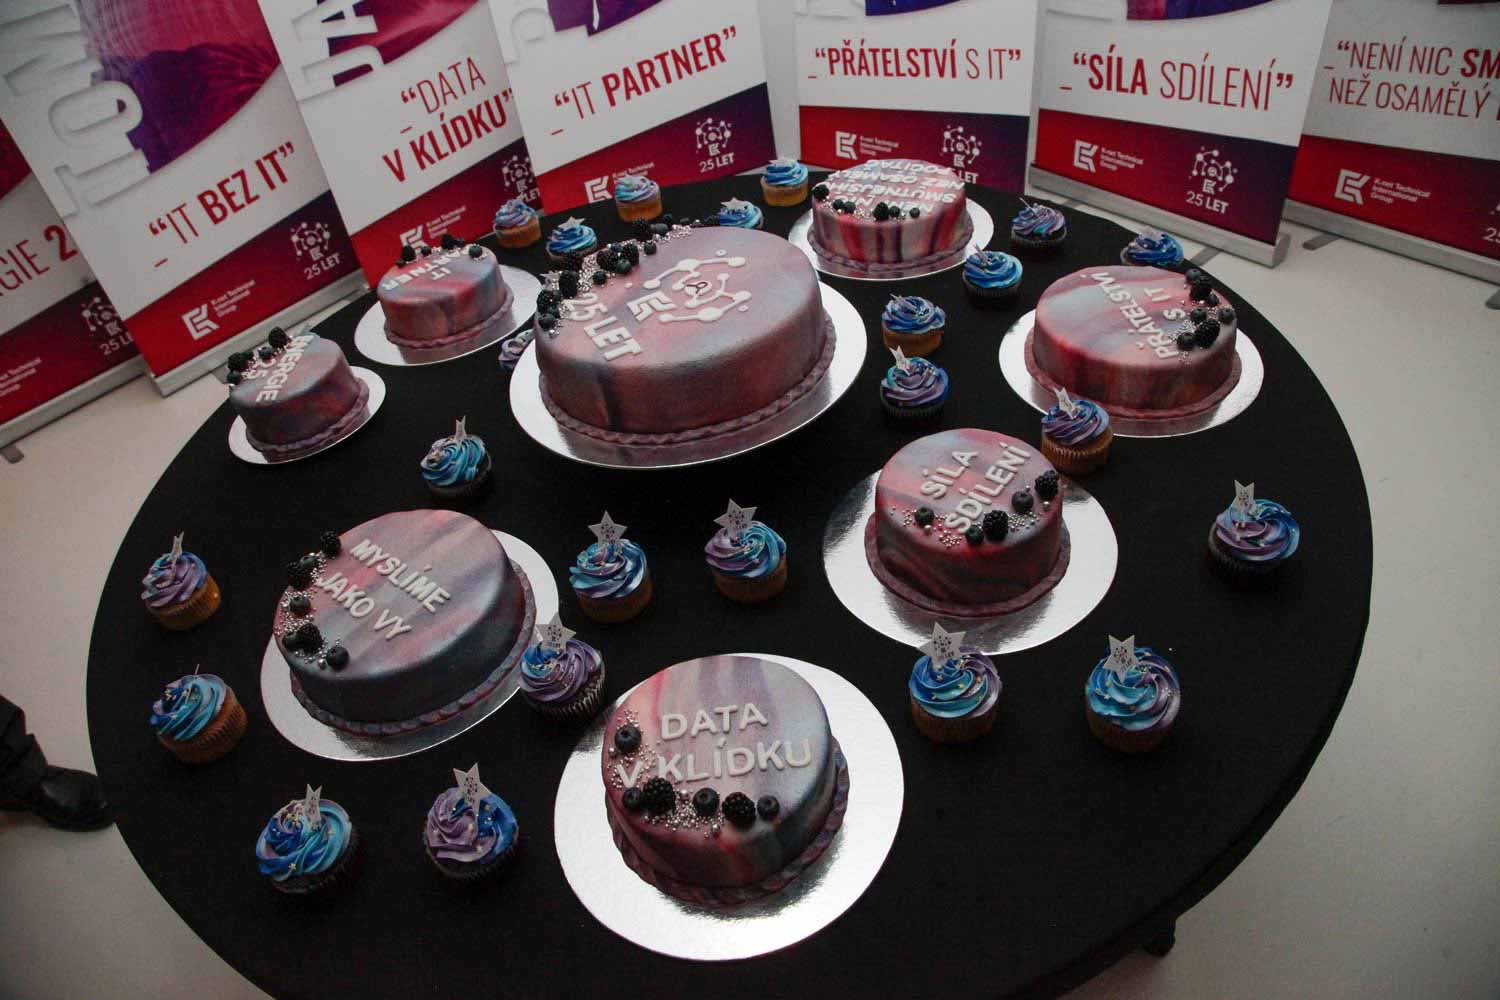 Cakes for the 25th anniversary of K-net on the theme of planetarium